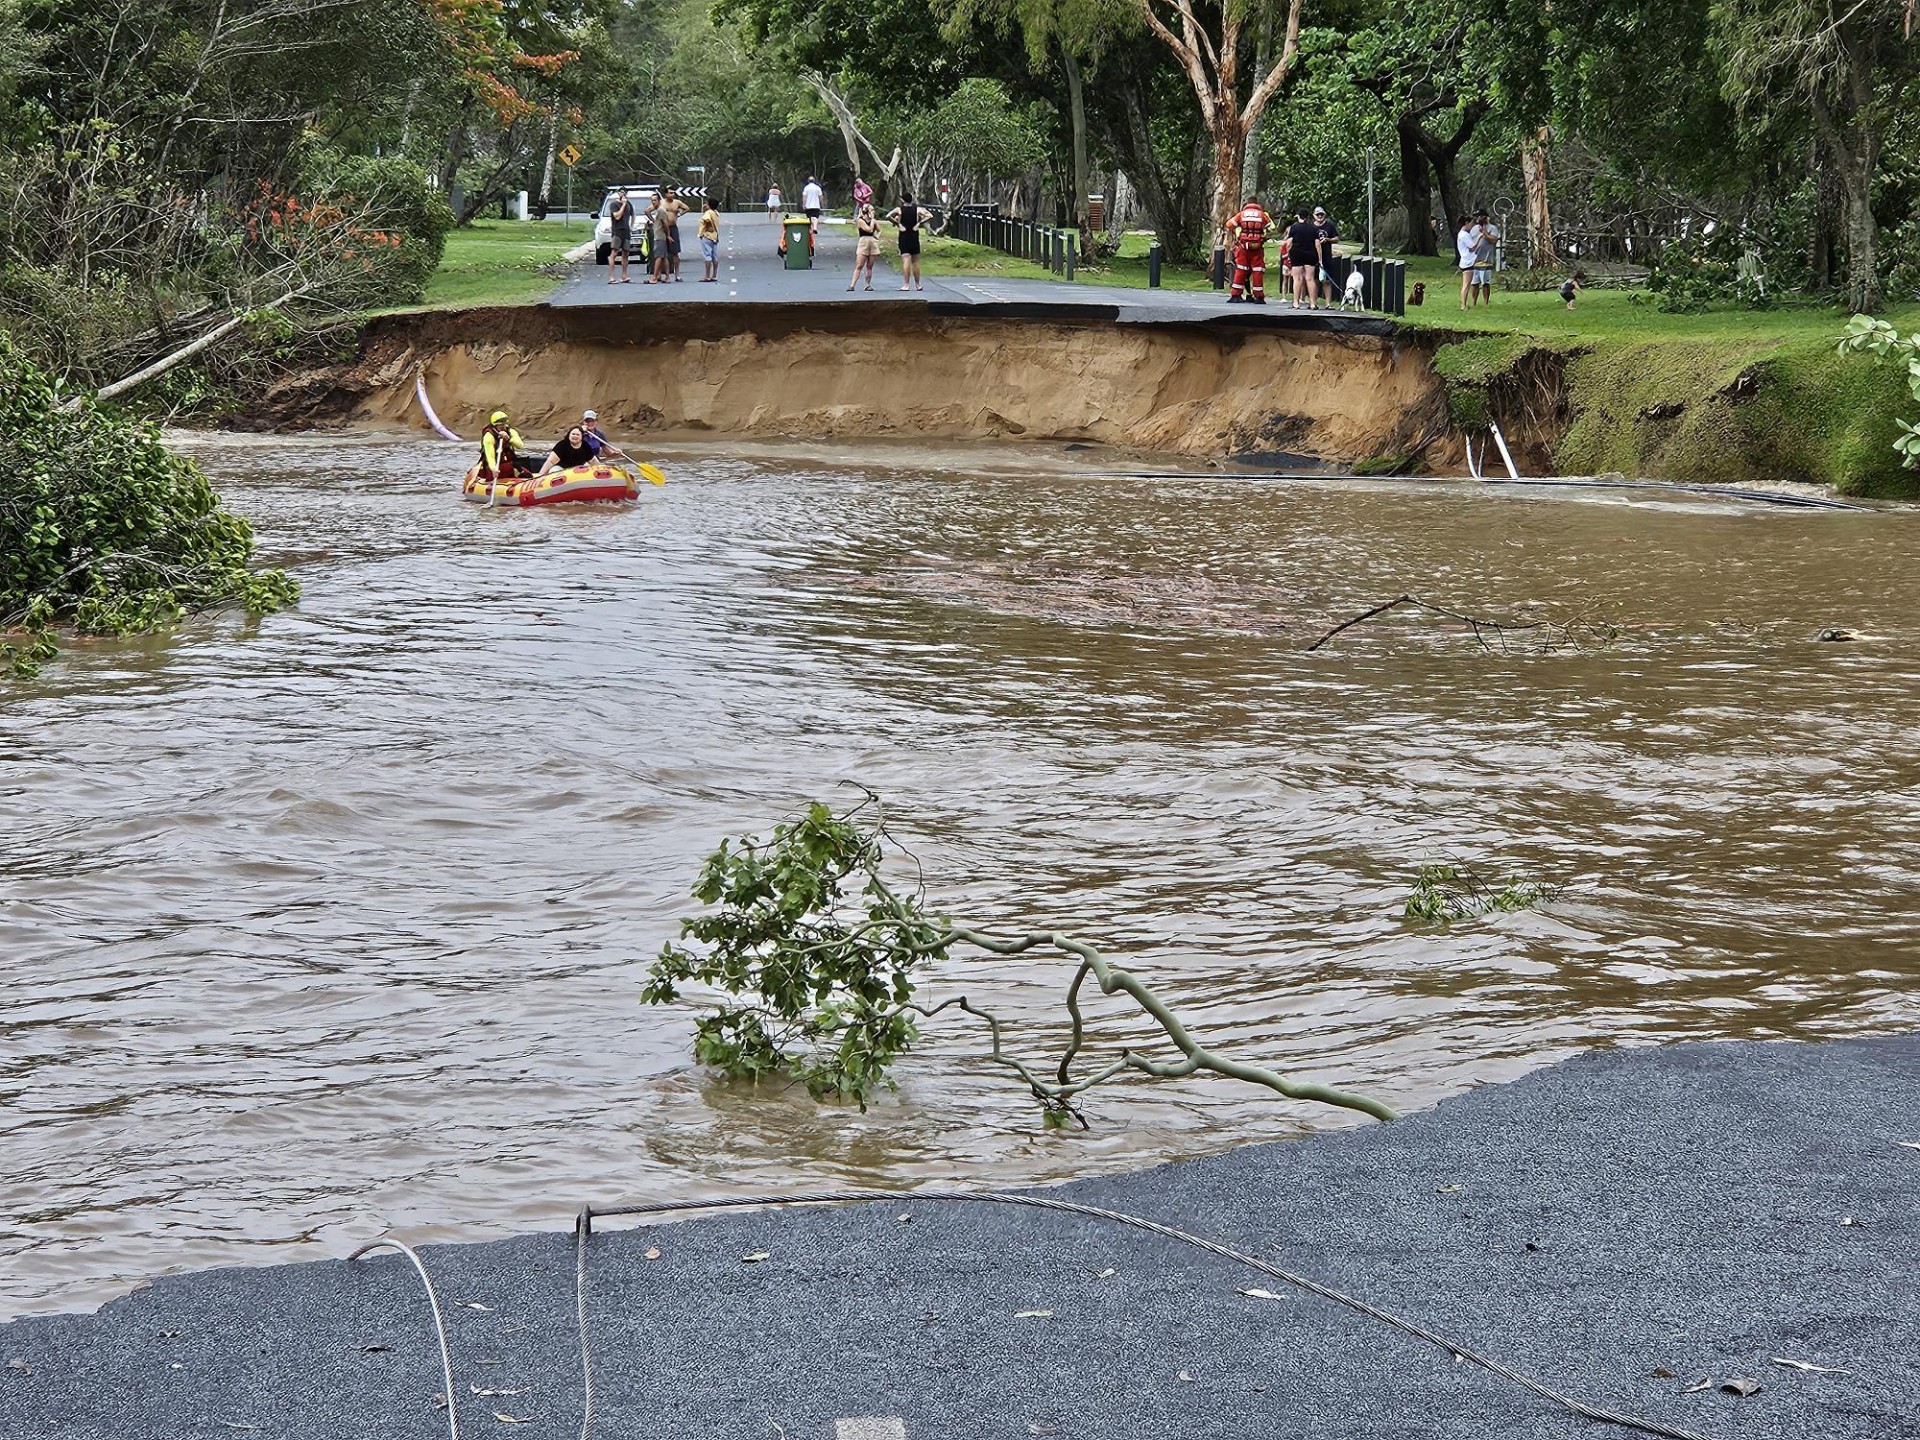 Personnel conduct search and rescue operations in the flooded area in Queensland, Australia on December 18, 2023. More than 300 rescued from floodwaters. Photo via Getty Images